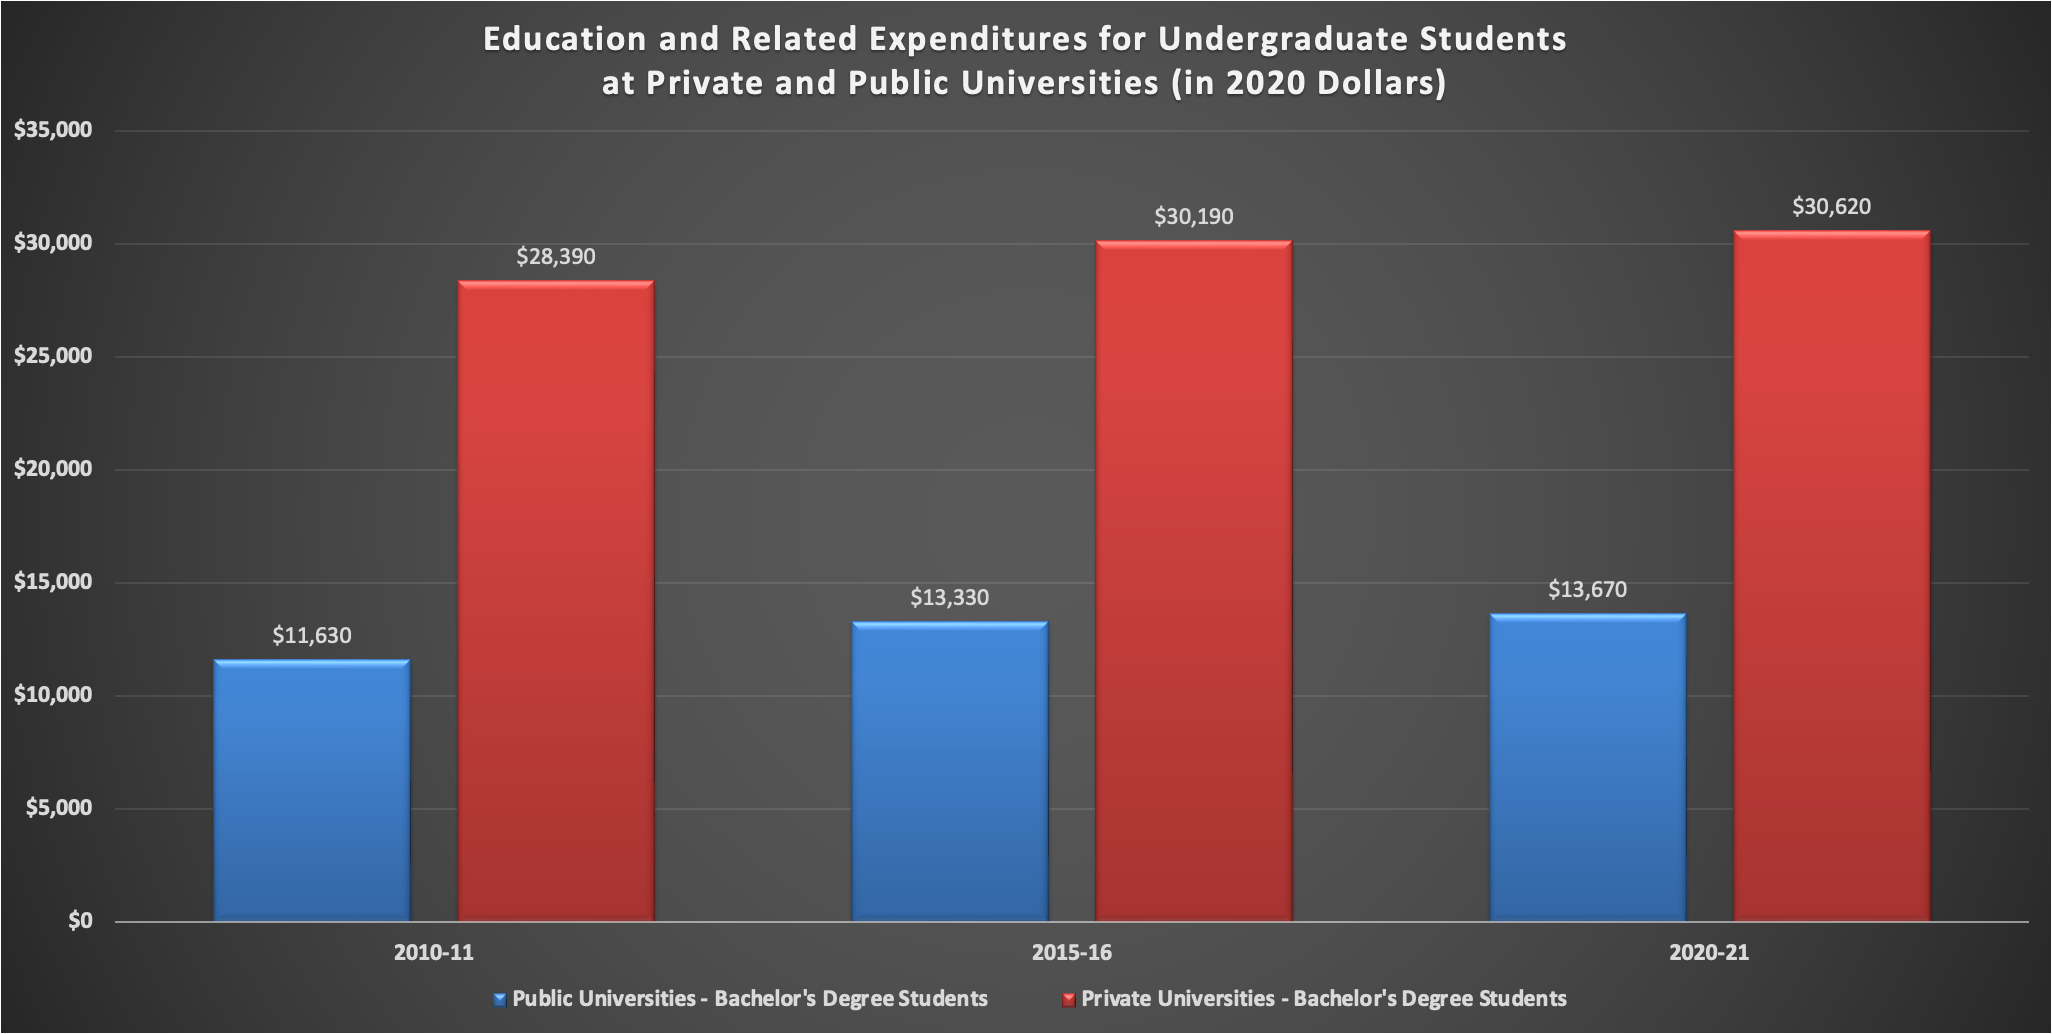 Education and Related Expenditures for Undergraduate Students at Private and Public Universities (in 2020 Dollars)